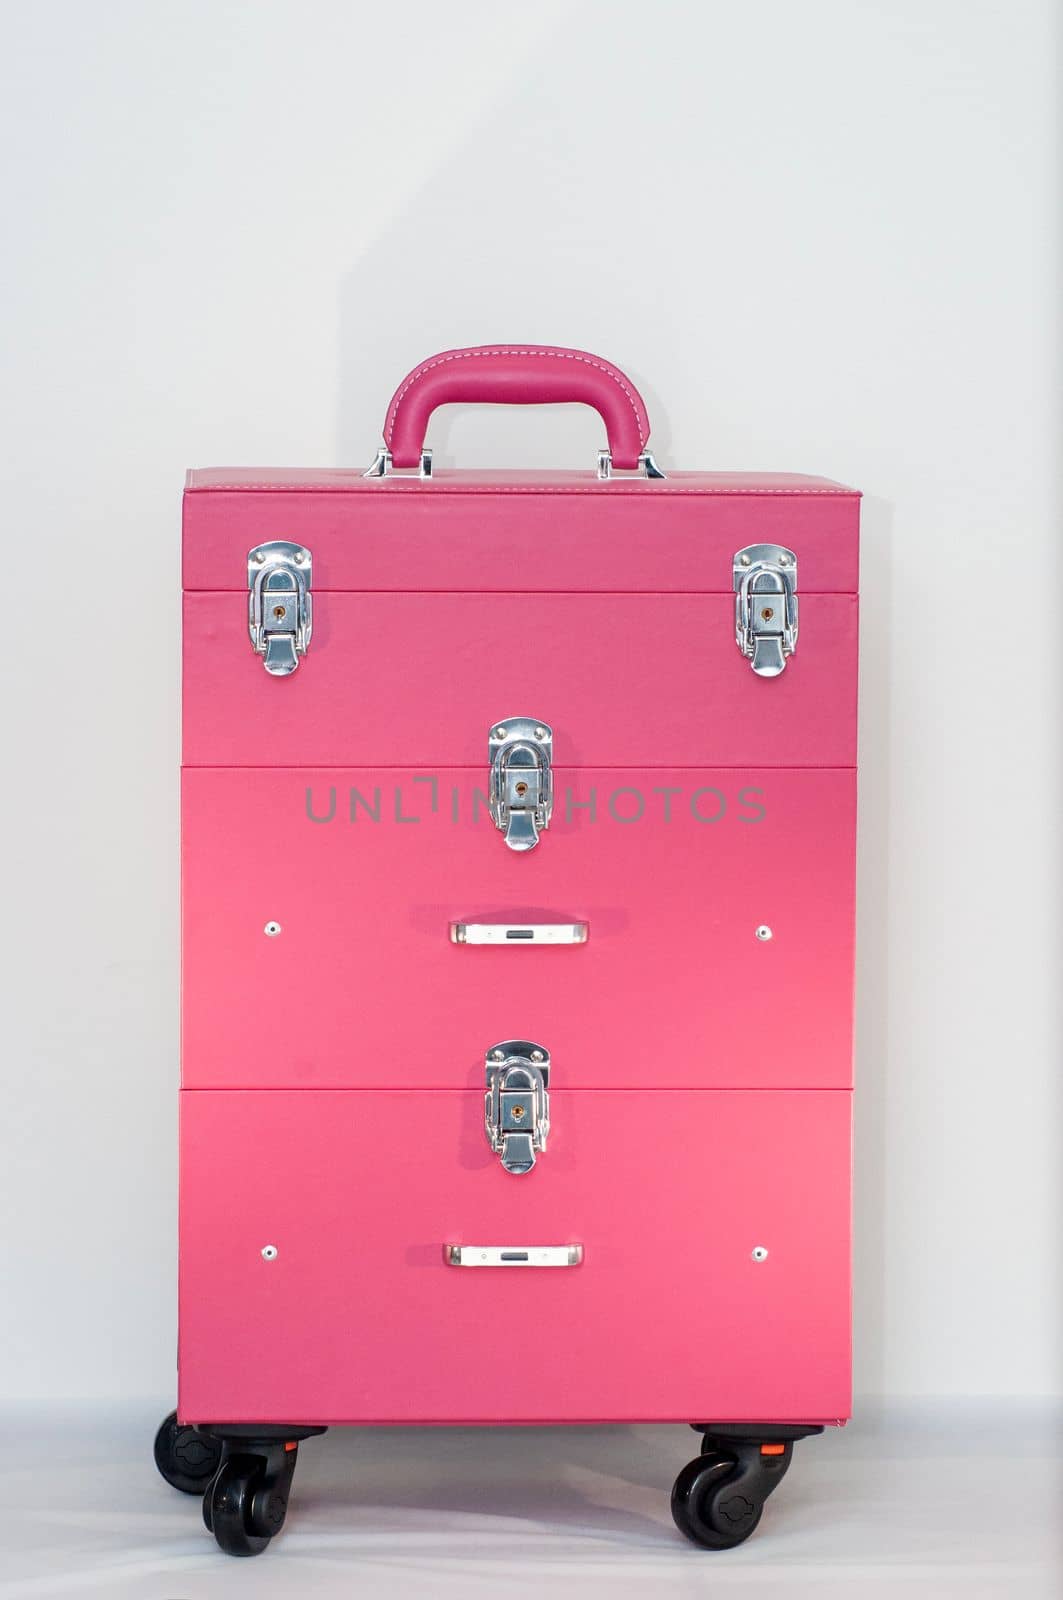 professional makeup artist's cosmetic bag, pink suitcase close-up, by KaterinaDalemans